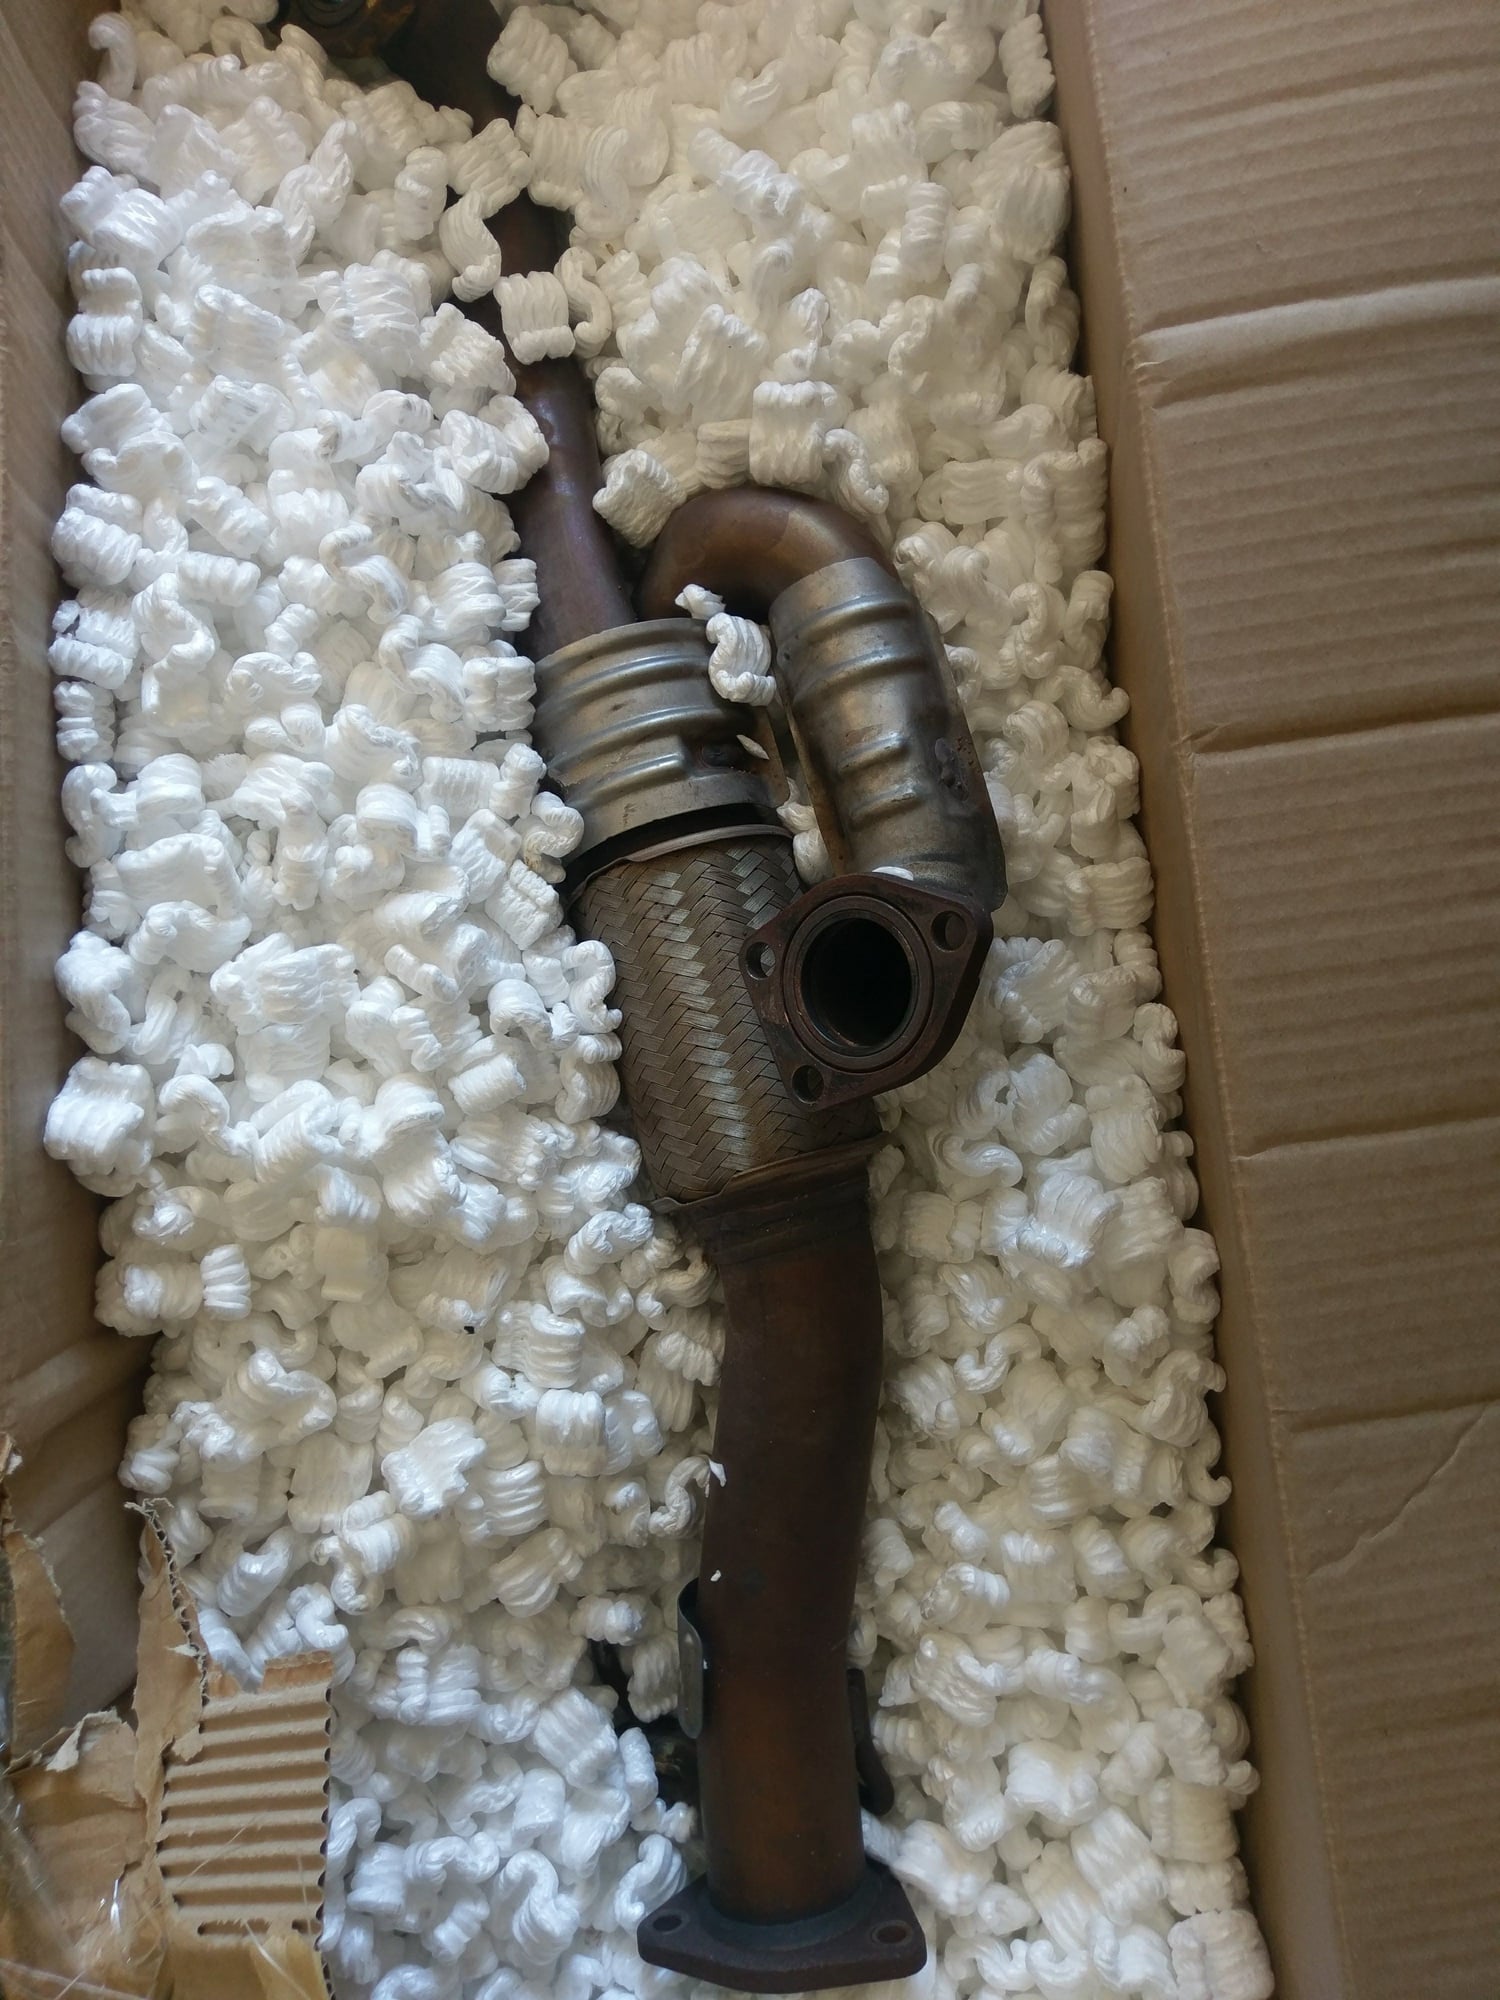 Engine - Exhaust - FS: DFW OEM TL 07-08 Parts - Used - 2004 to 2008 Acura TL - Grand Prairie, TX 75052, United States